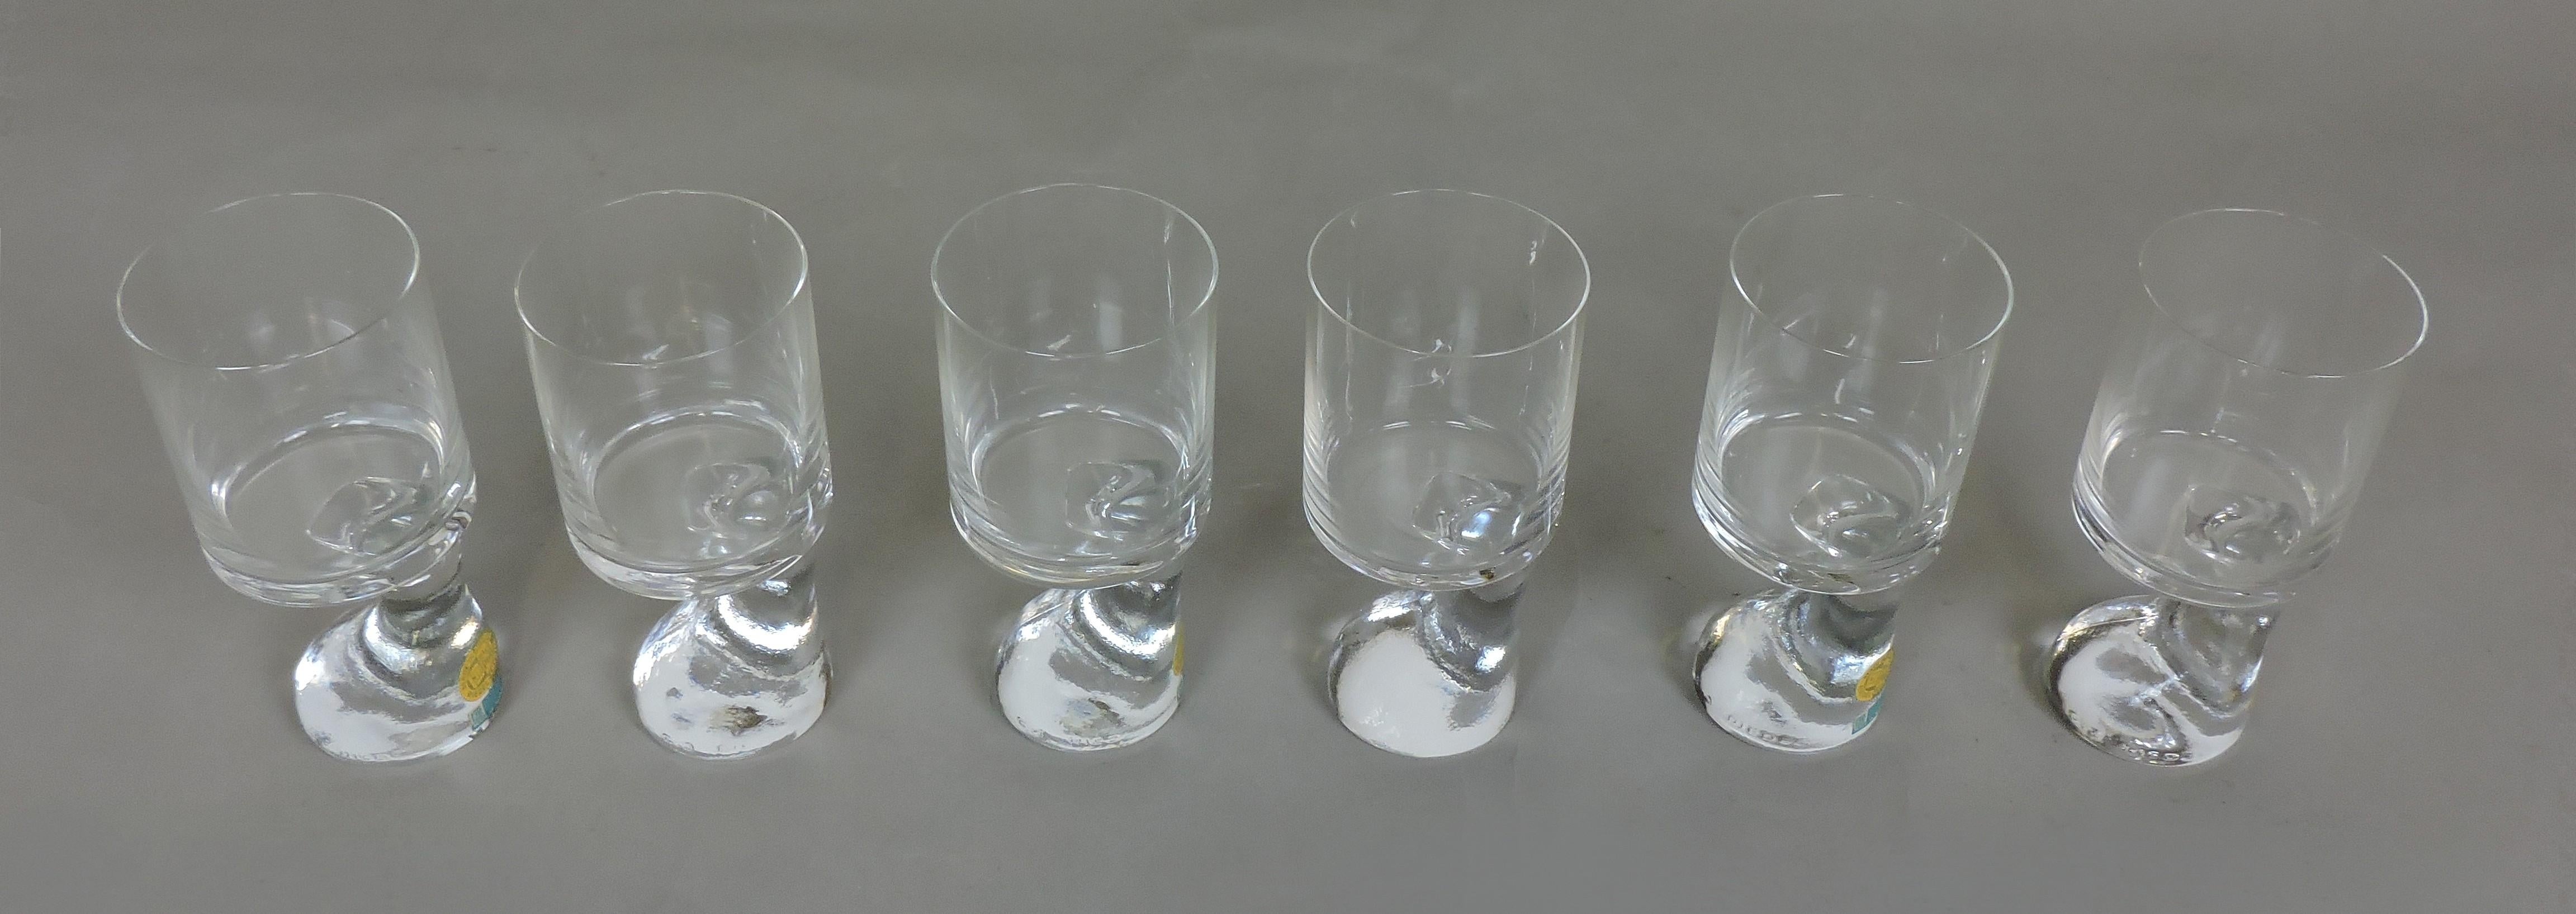 Set of six very cool Assimetrico drinking glasses designed in 1964 by Joe Colombo and manufactured in Austria by Riedel. These glasses are made of crystal and were designed so that the user can hold a drink and a cigarette in one hand, and would